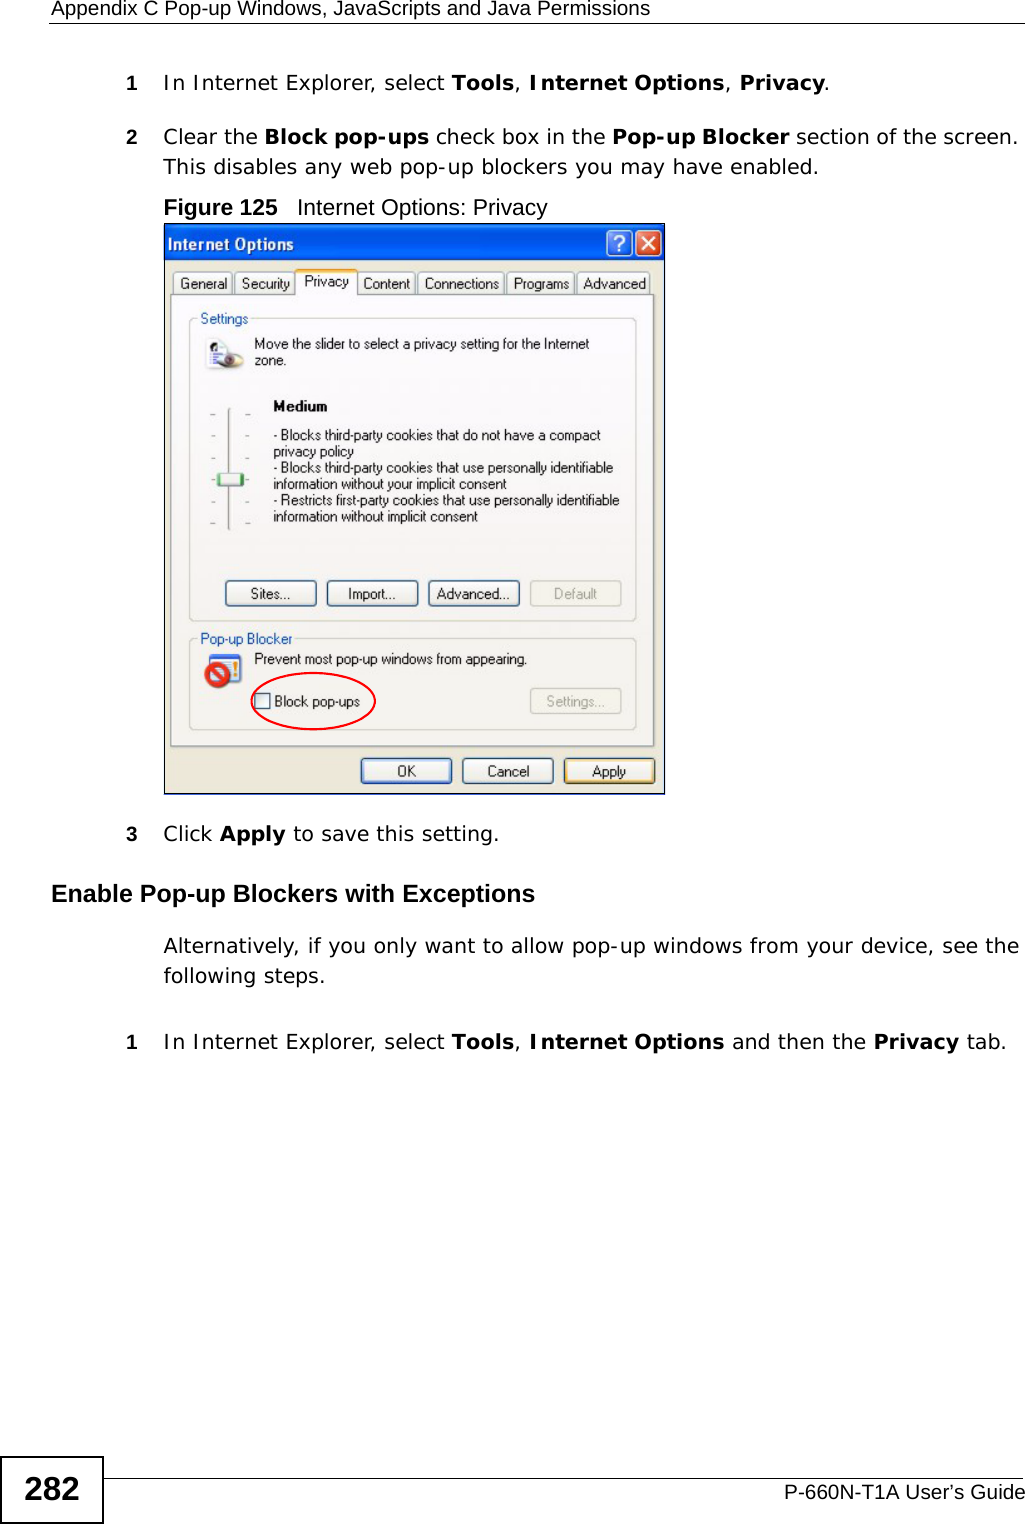 Appendix C Pop-up Windows, JavaScripts and Java PermissionsP-660N-T1A User’s Guide2821In Internet Explorer, select Tools, Internet Options, Privacy.2Clear the Block pop-ups check box in the Pop-up Blocker section of the screen. This disables any web pop-up blockers you may have enabled. Figure 125   Internet Options: Privacy3Click Apply to save this setting.Enable Pop-up Blockers with ExceptionsAlternatively, if you only want to allow pop-up windows from your device, see the following steps.1In Internet Explorer, select Tools, Internet Options and then the Privacy tab. 